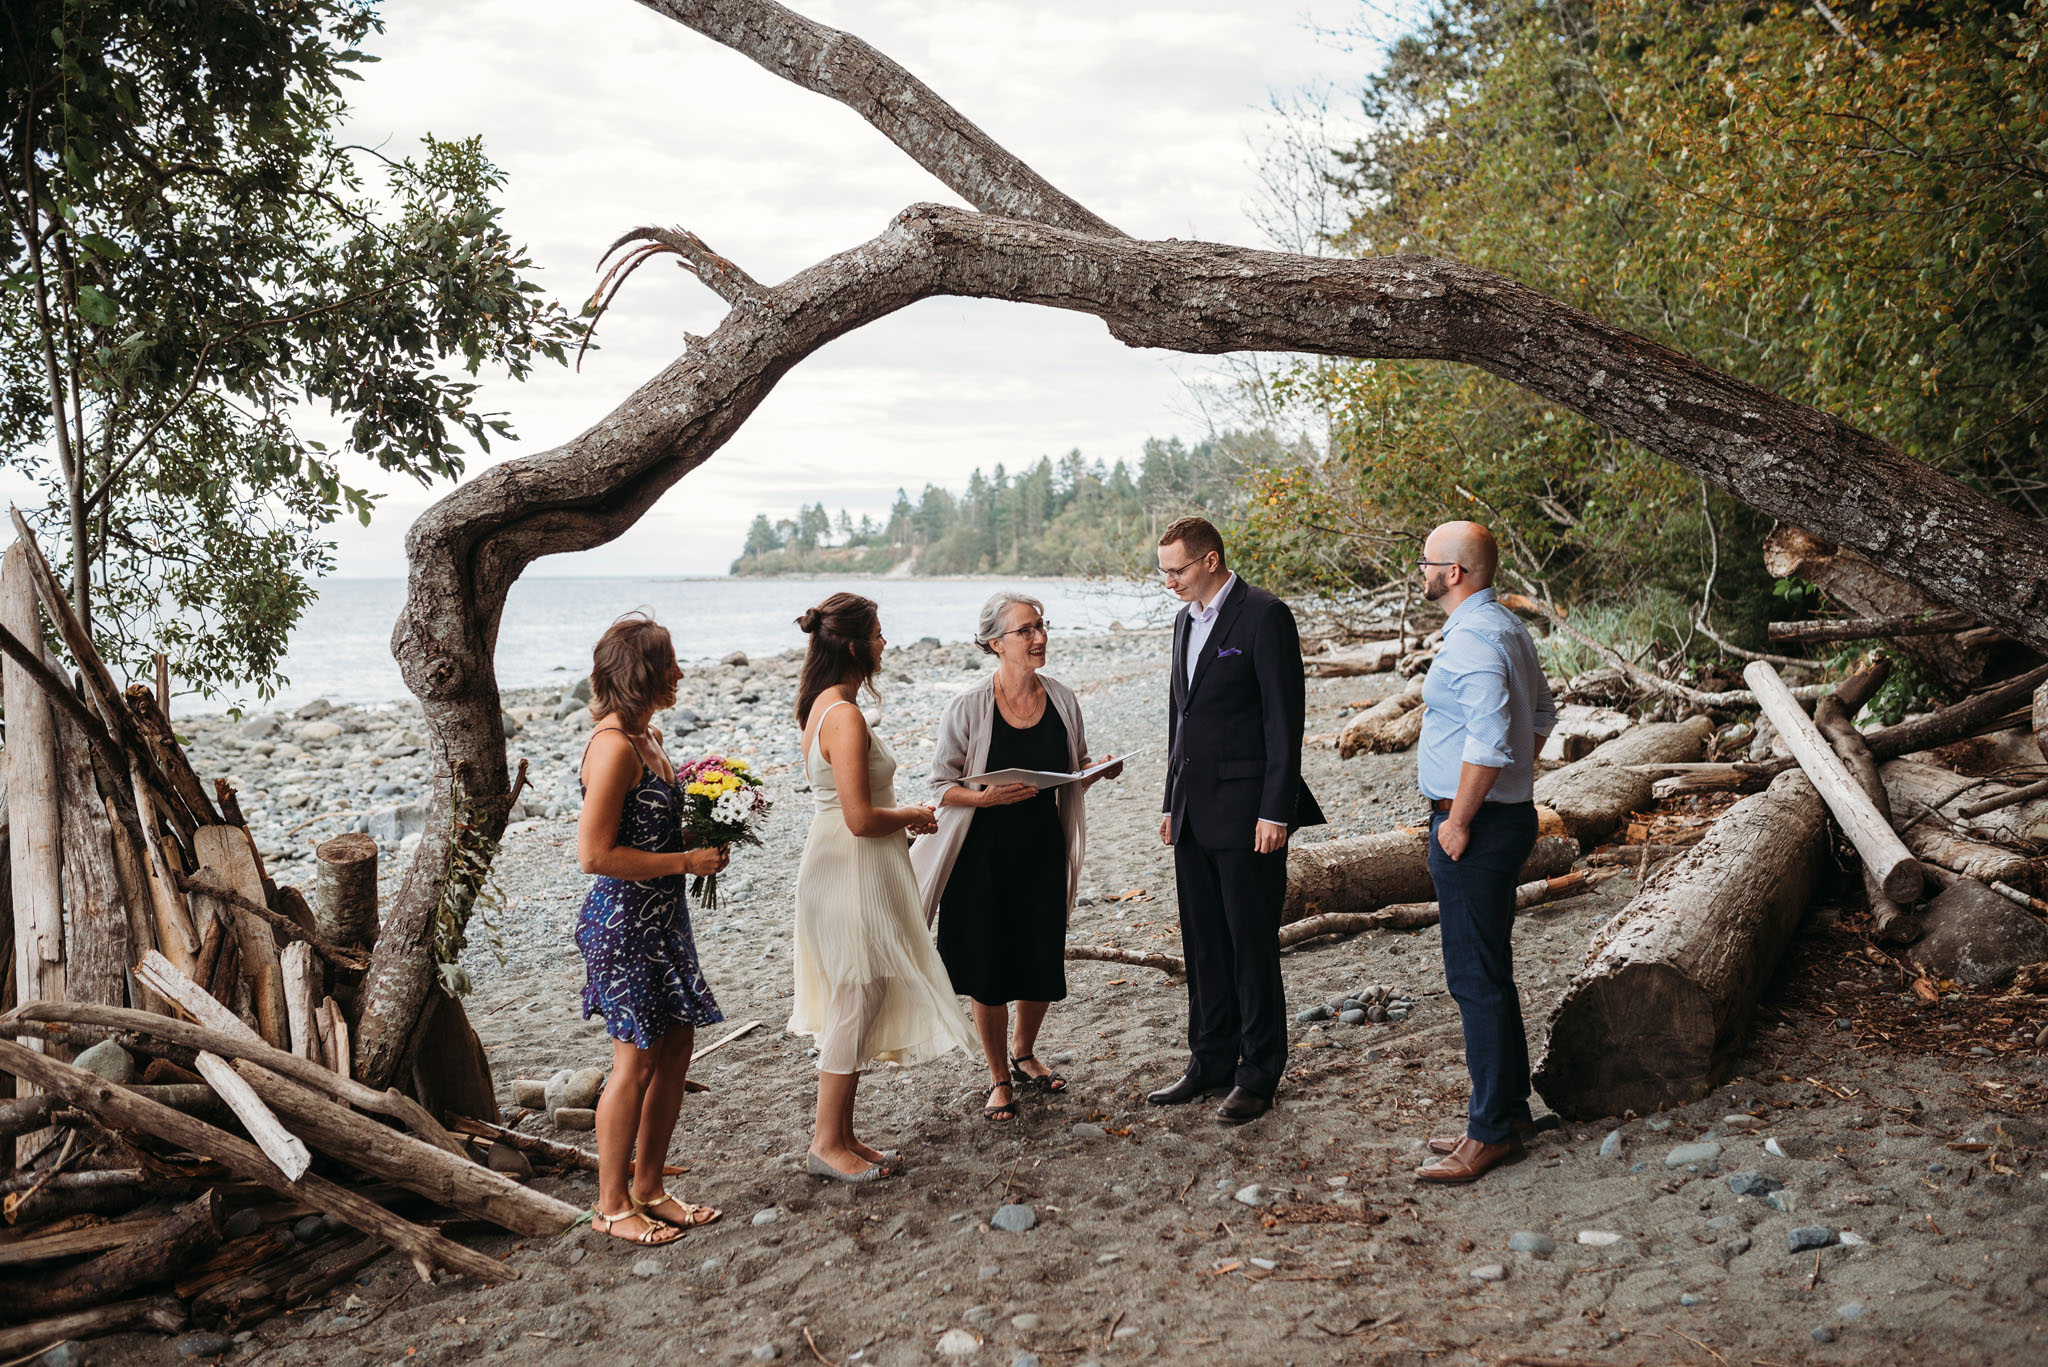 Beach elopement ceremony at Seal Bay Nature Park in the Comox Valley.